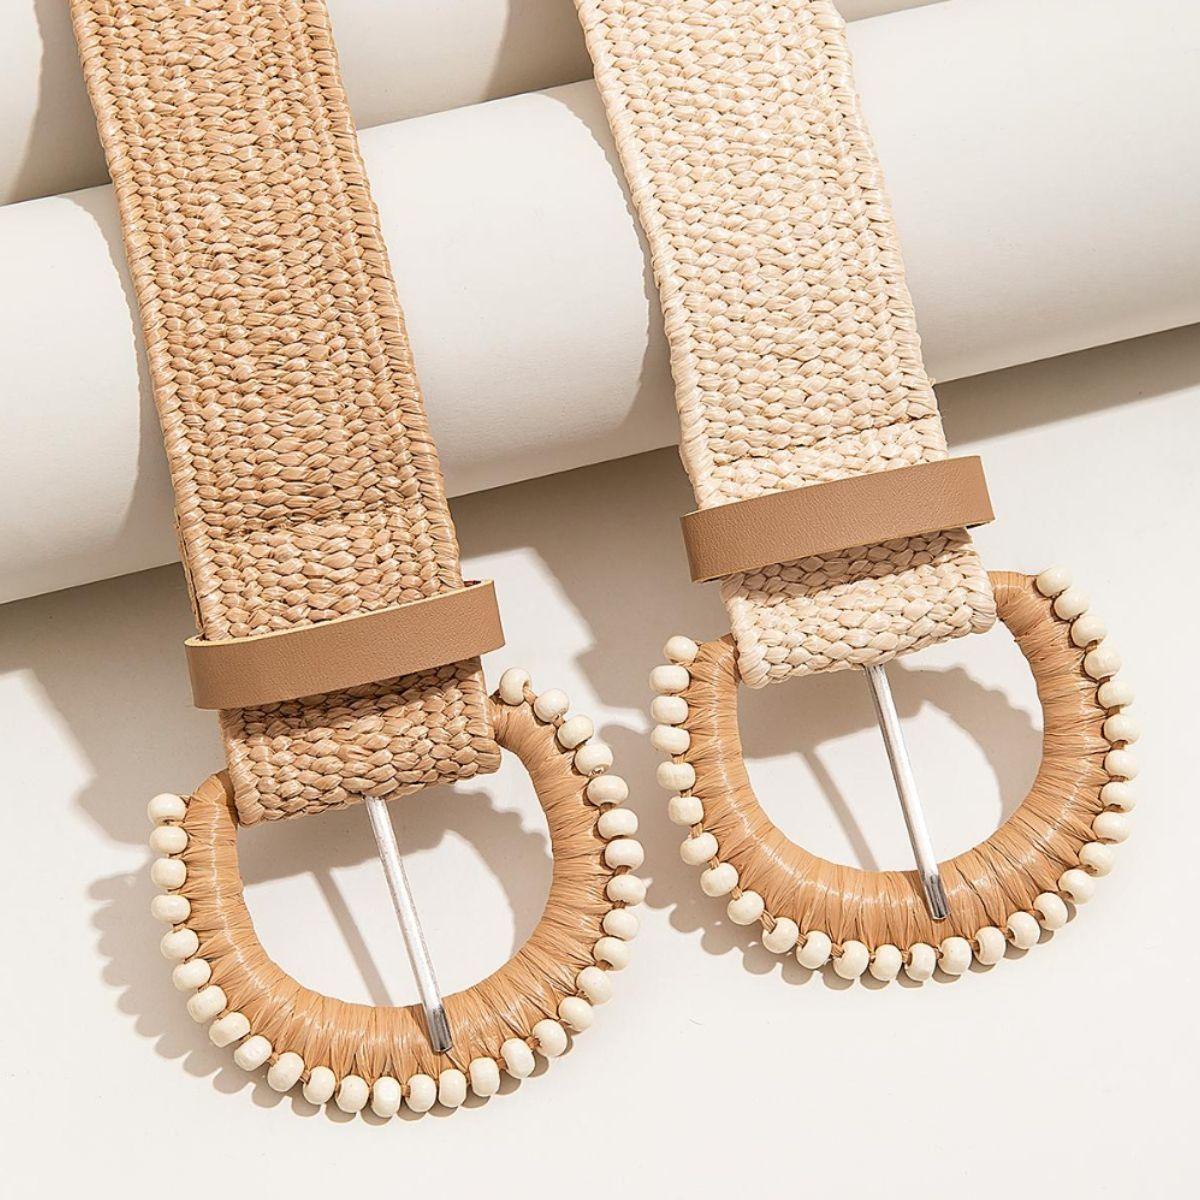 a pair of wooden hoop earrings on a white surface